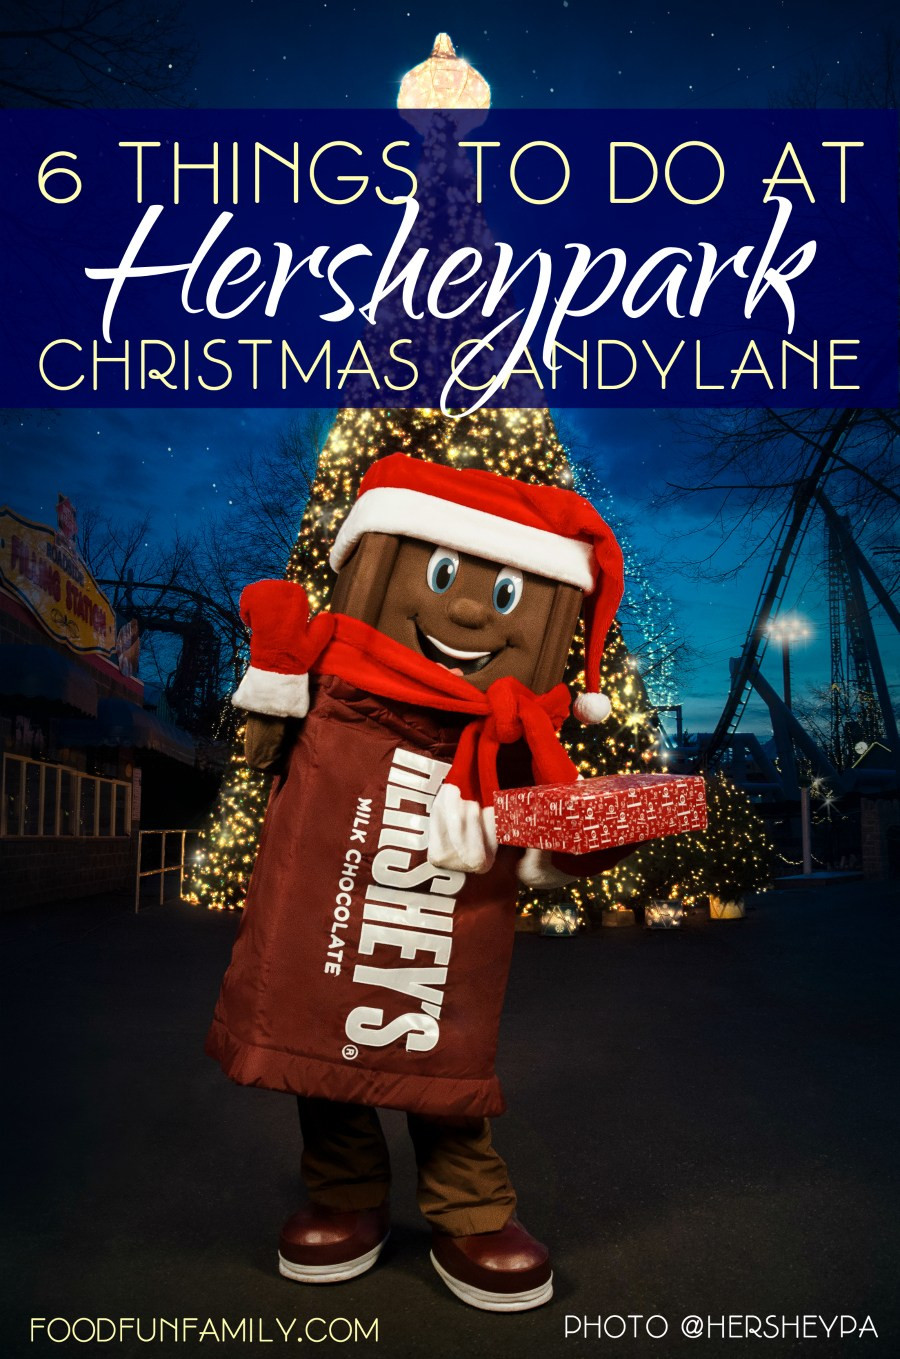 Christmas Candy Lane Hours
 6 Things to Do at Hersheypark Christmas Candylane